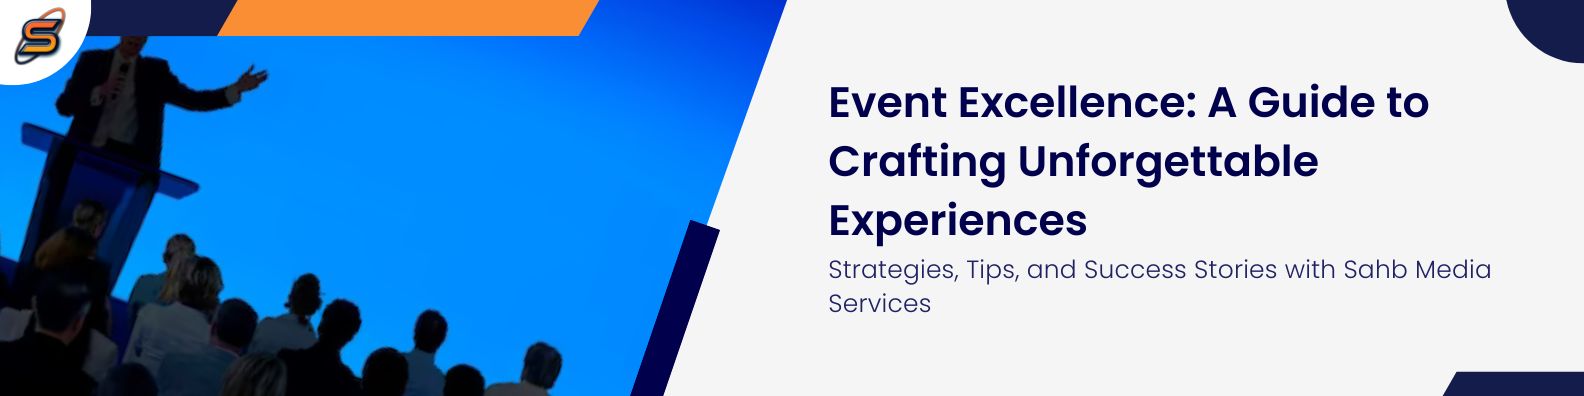 Event Excellence: A Guide to Crafting Unforgettable Experiences